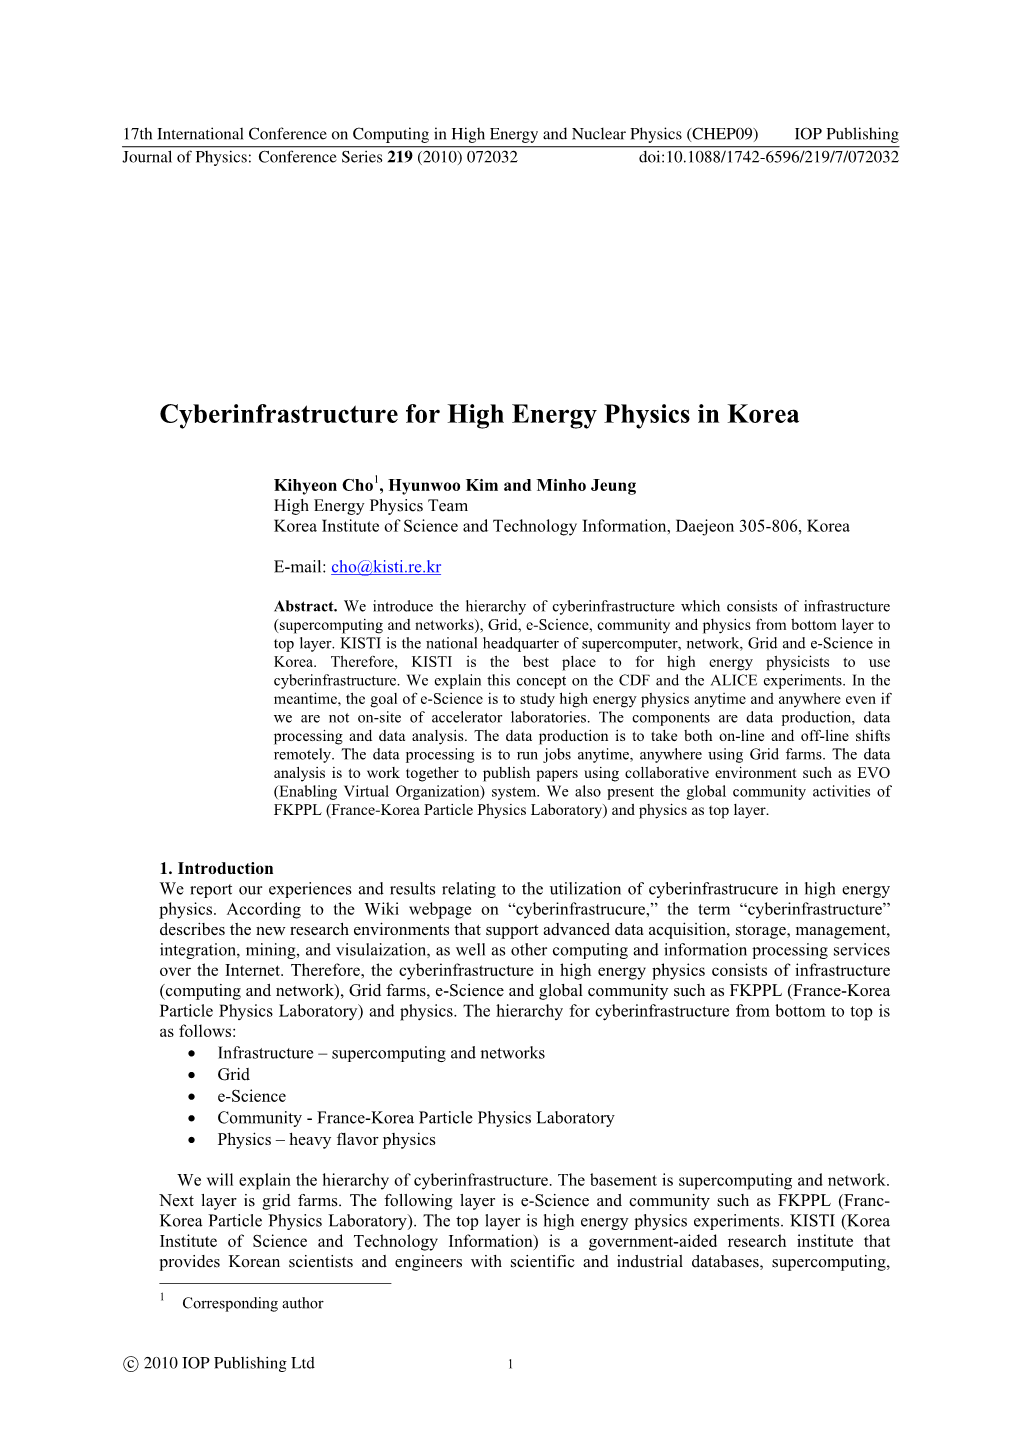 Cyberinfrastructure for High Energy Physics in Korea